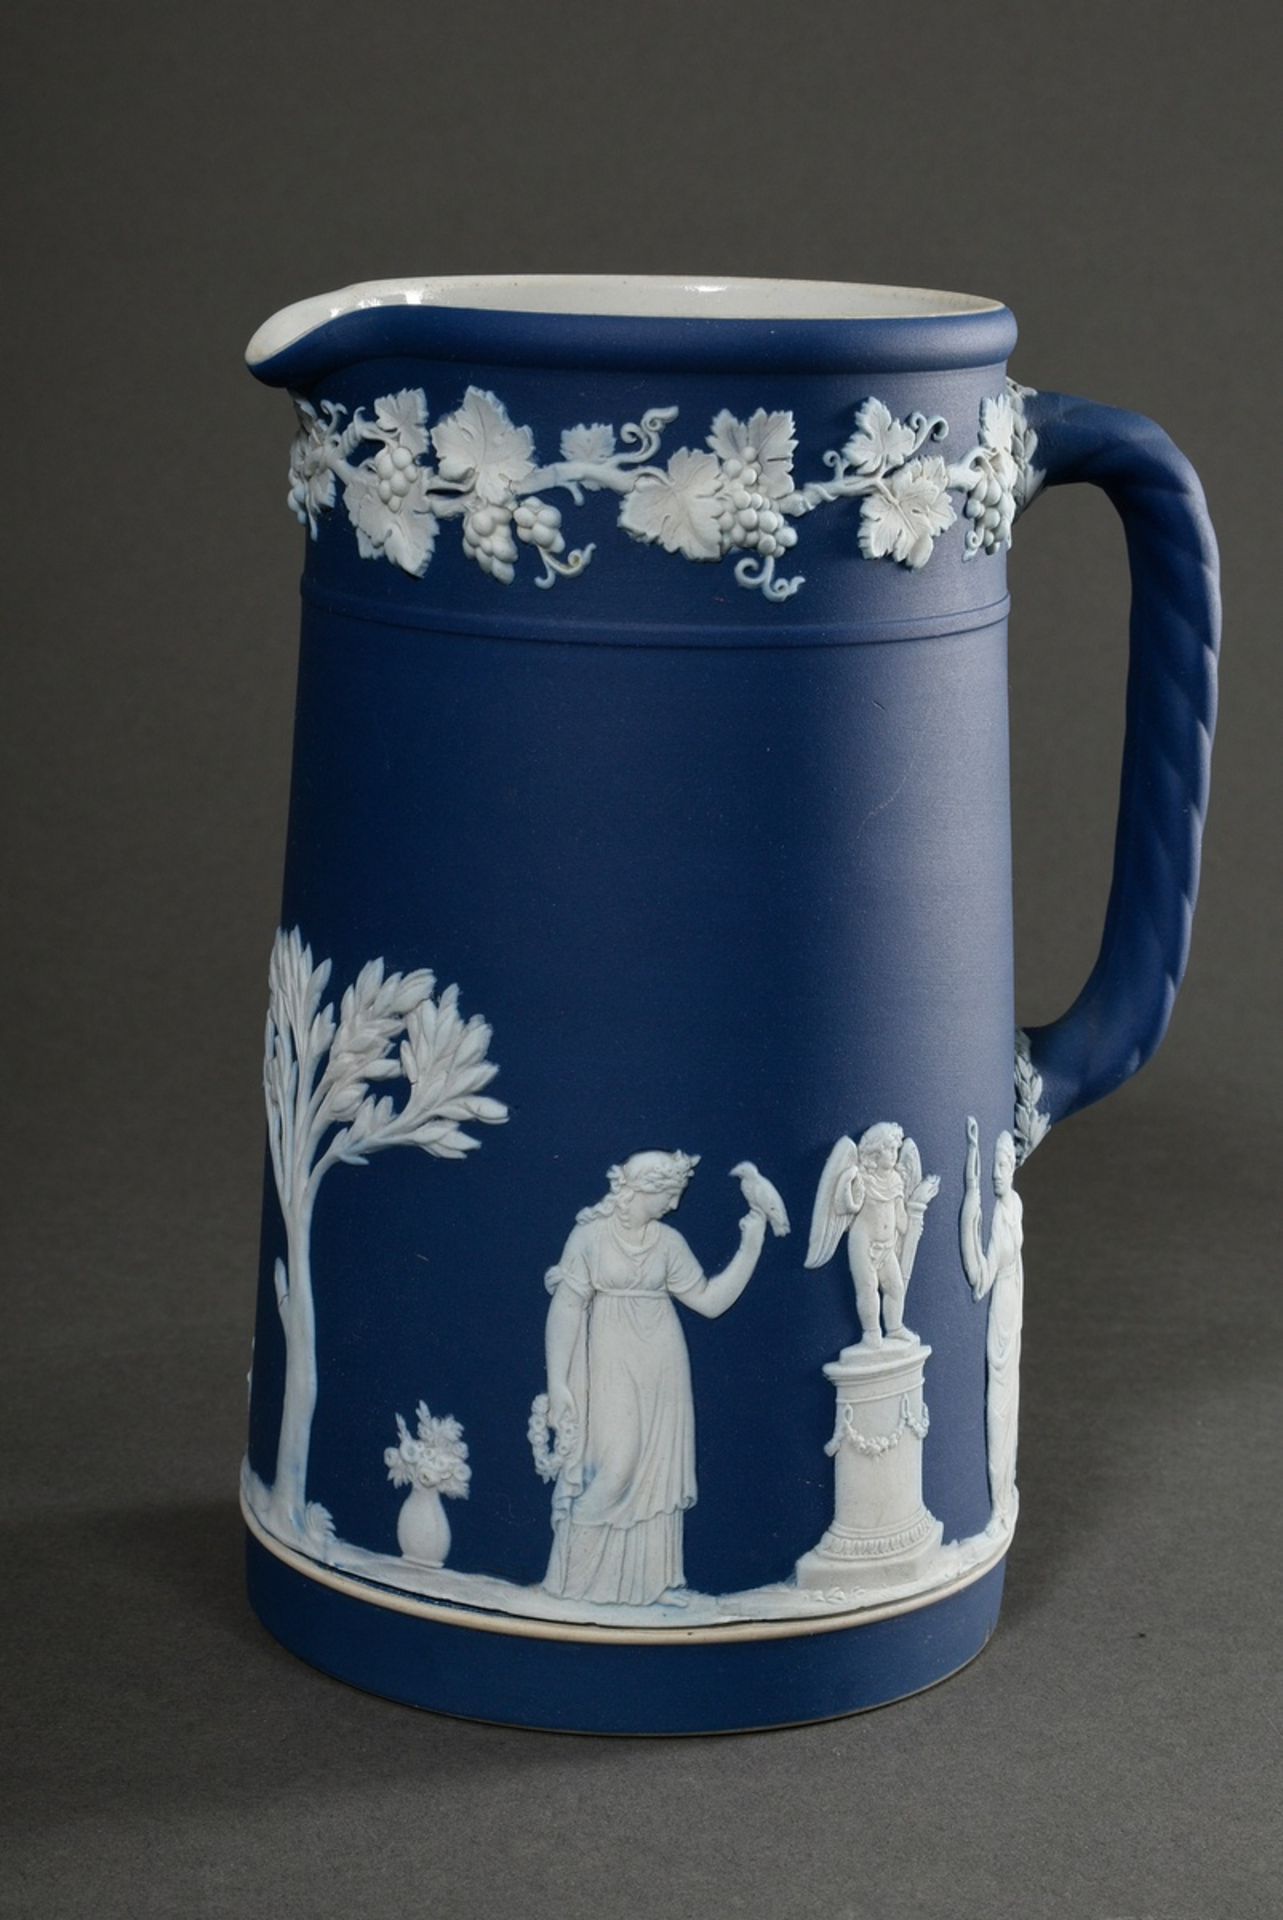 5 Various pieces Wedgwood Tête-à-Tête in blue jasperware with white bisque reliefs, England early 2 - Image 2 of 6